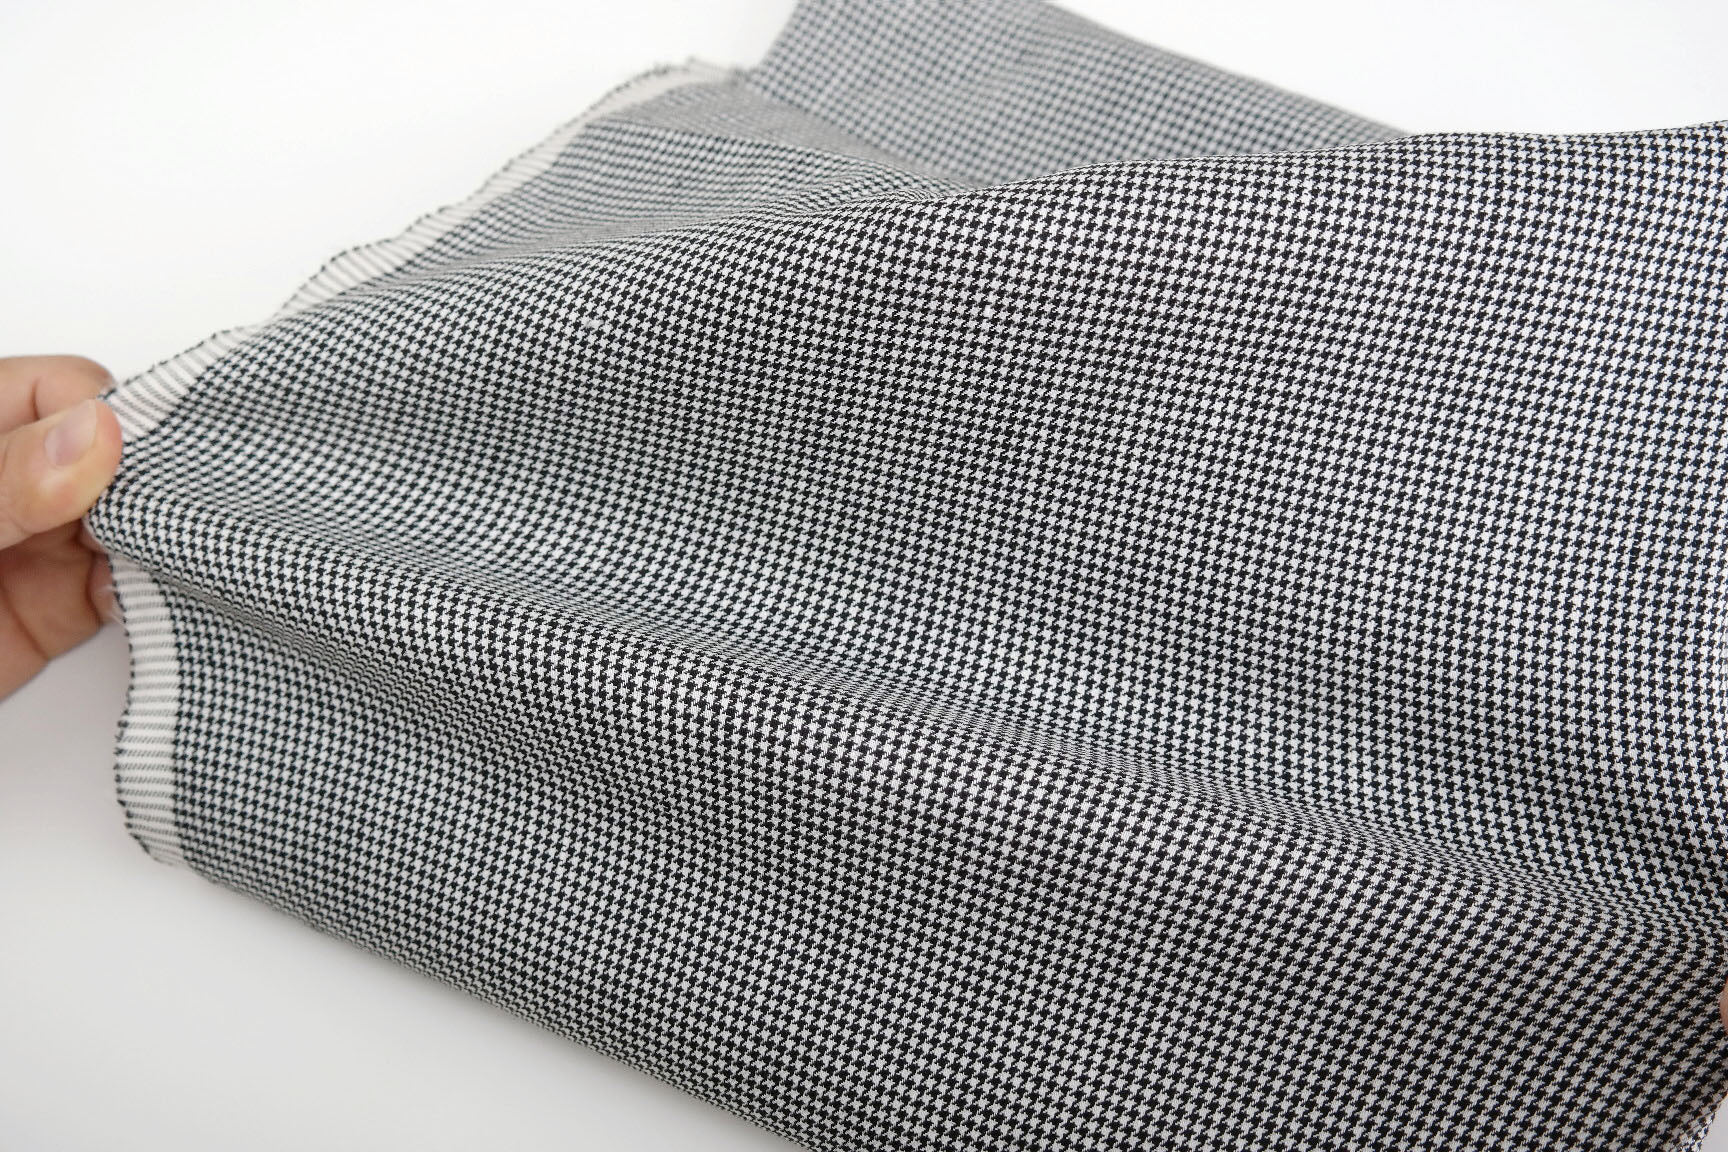 Linen Houndstooth Stretch Fabric (6027) - The Linen Lab - White and Black